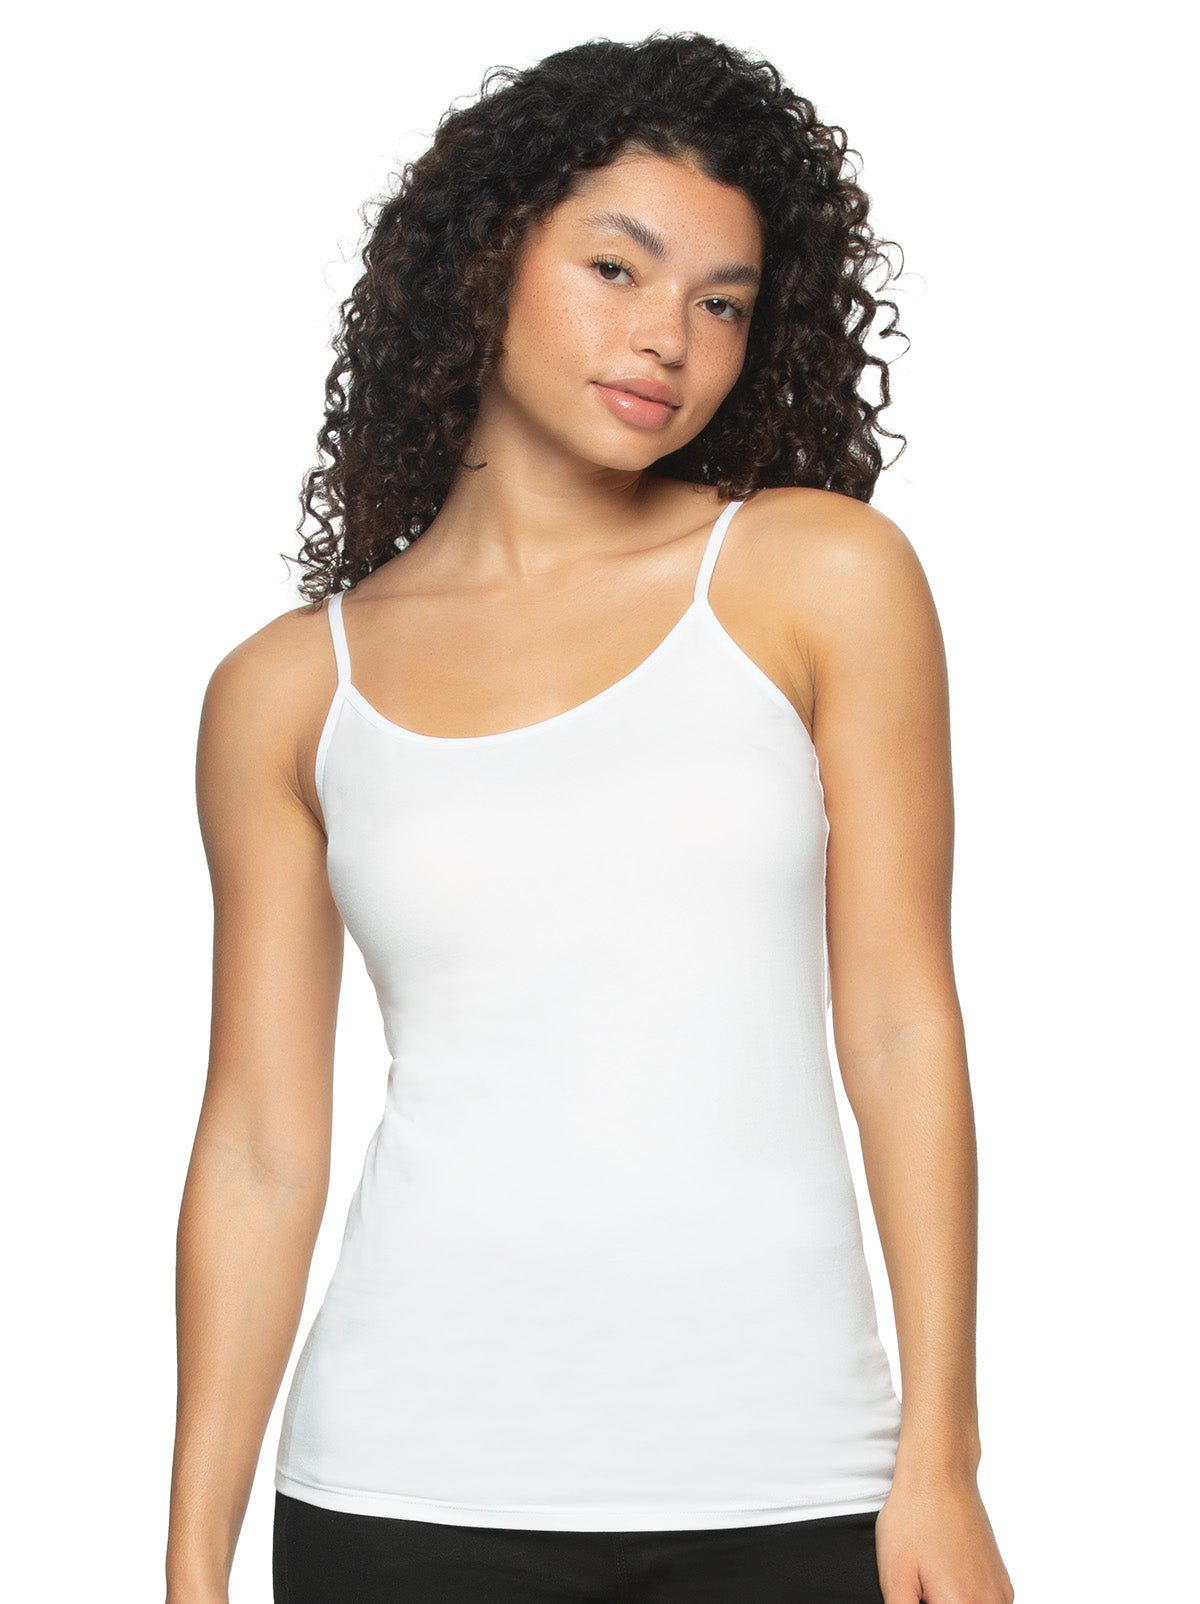 Felina, Signature Super Stretchy Lace Camisole Tank Top, Adjustable  Straps, Womens Tanks & Camis